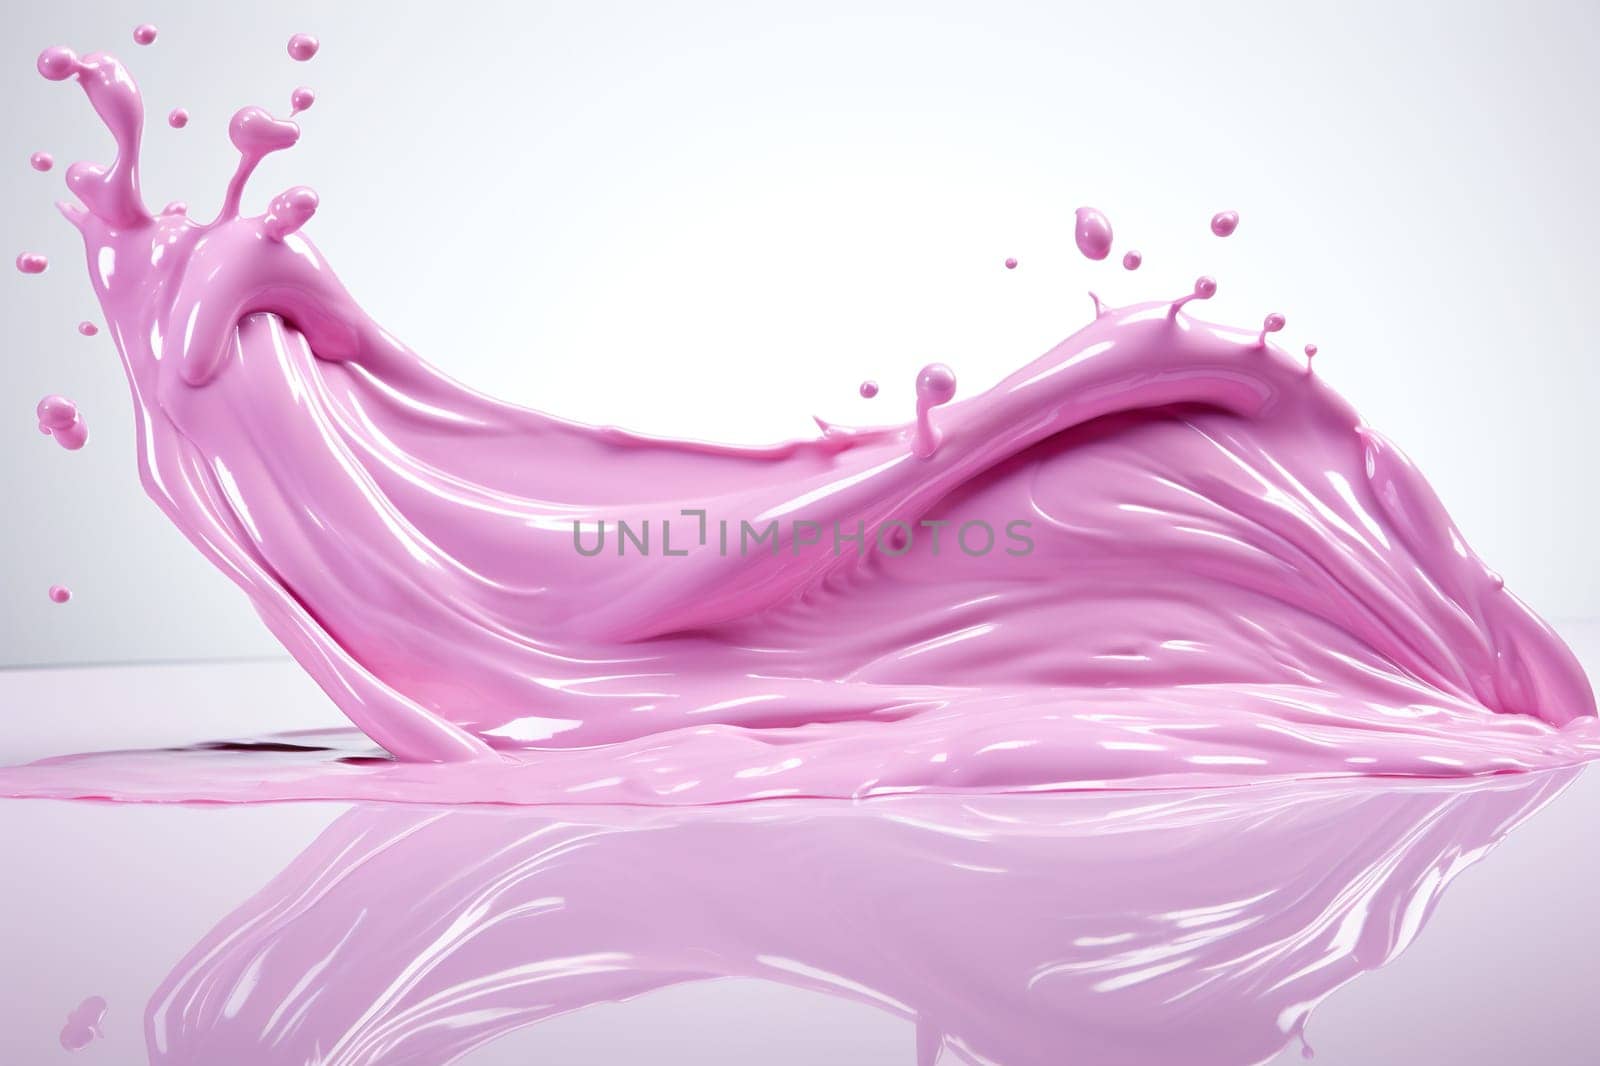 Splash of lilac icing, milk on a white background with reflection. Studio photo of the product.